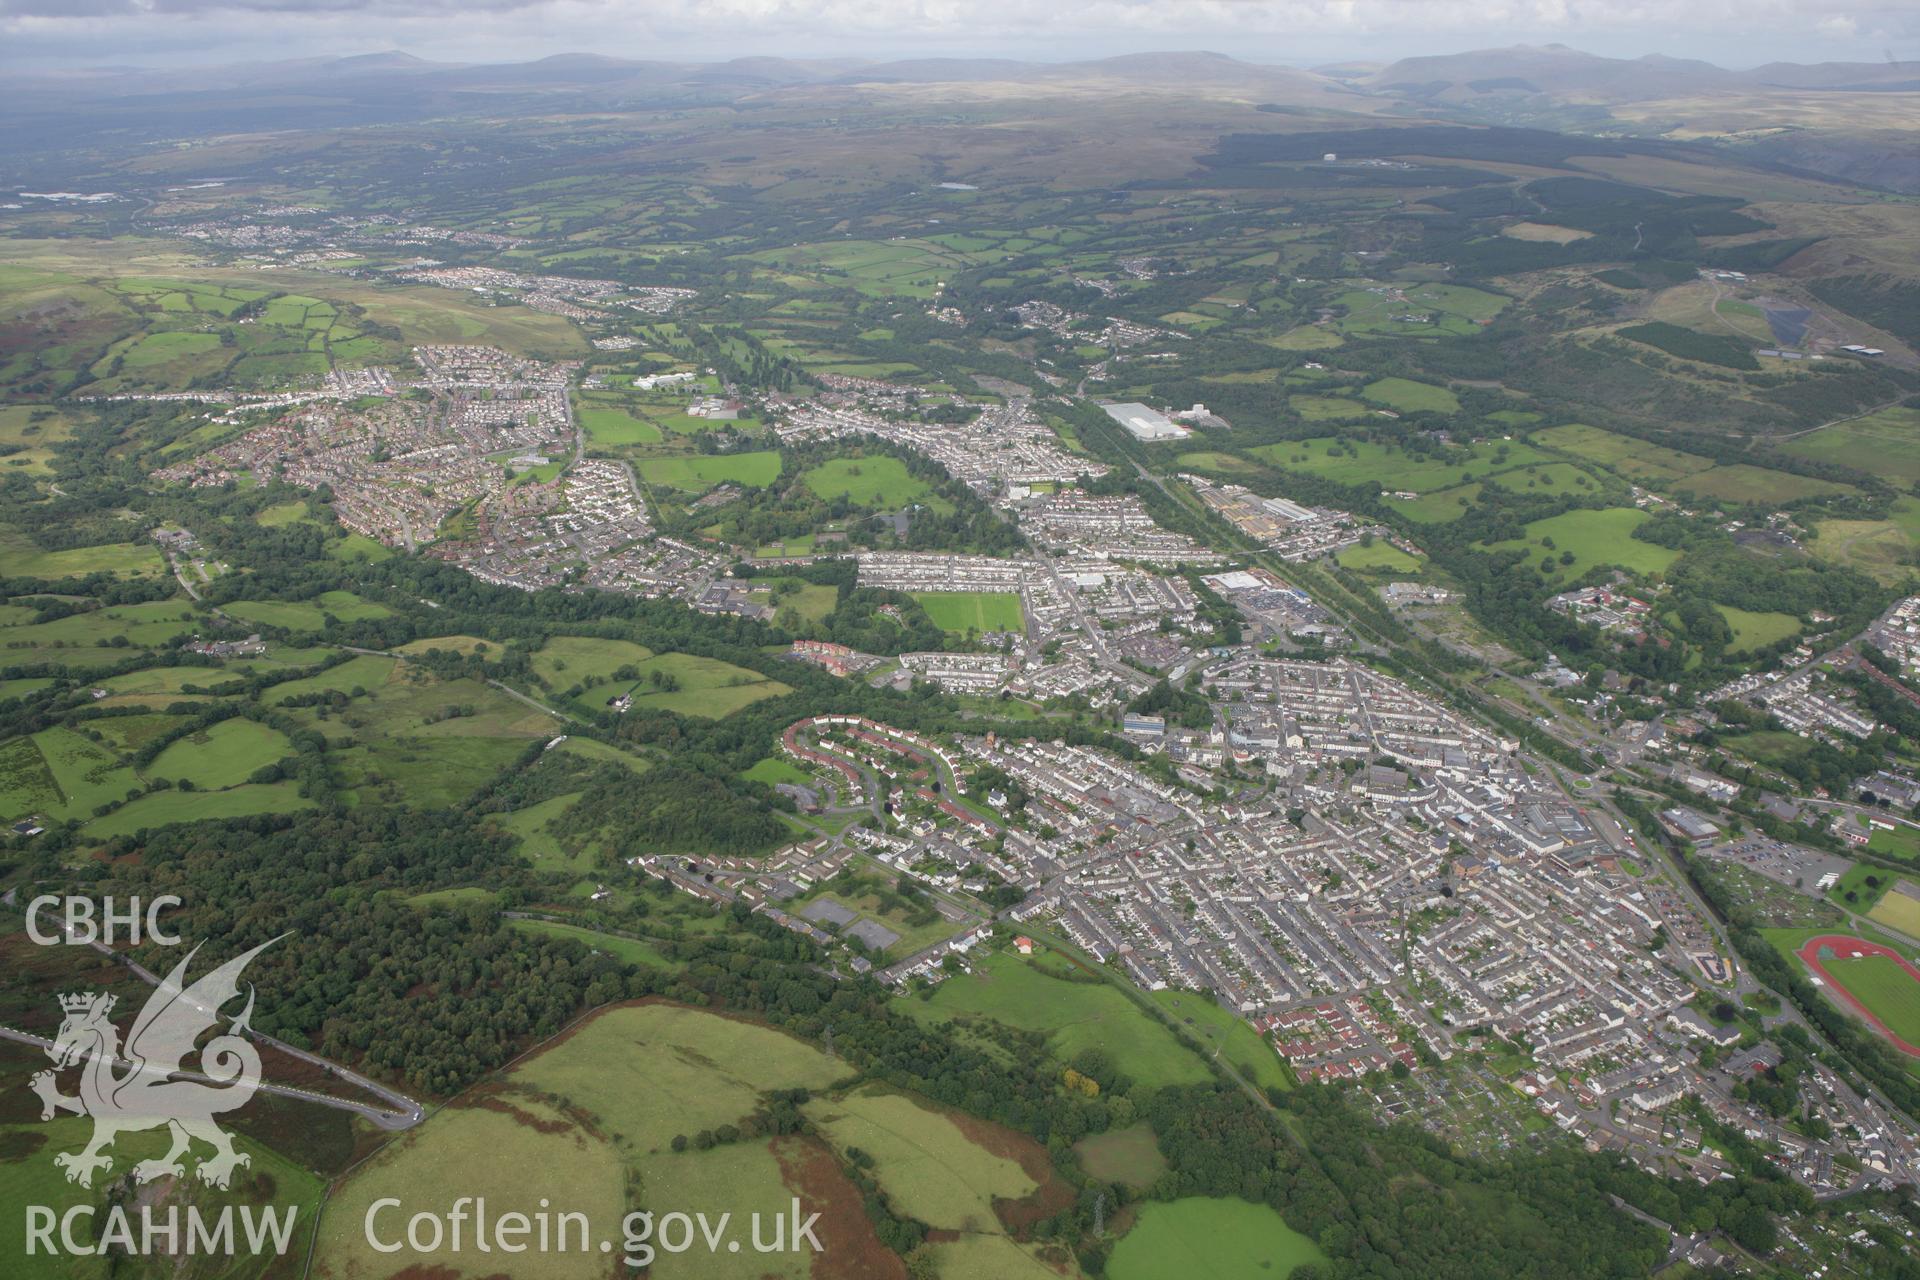 RCAHMW colour oblique photograph of Aberdare townscape, from the south-east. Taken by Toby Driver on 12/09/2008.